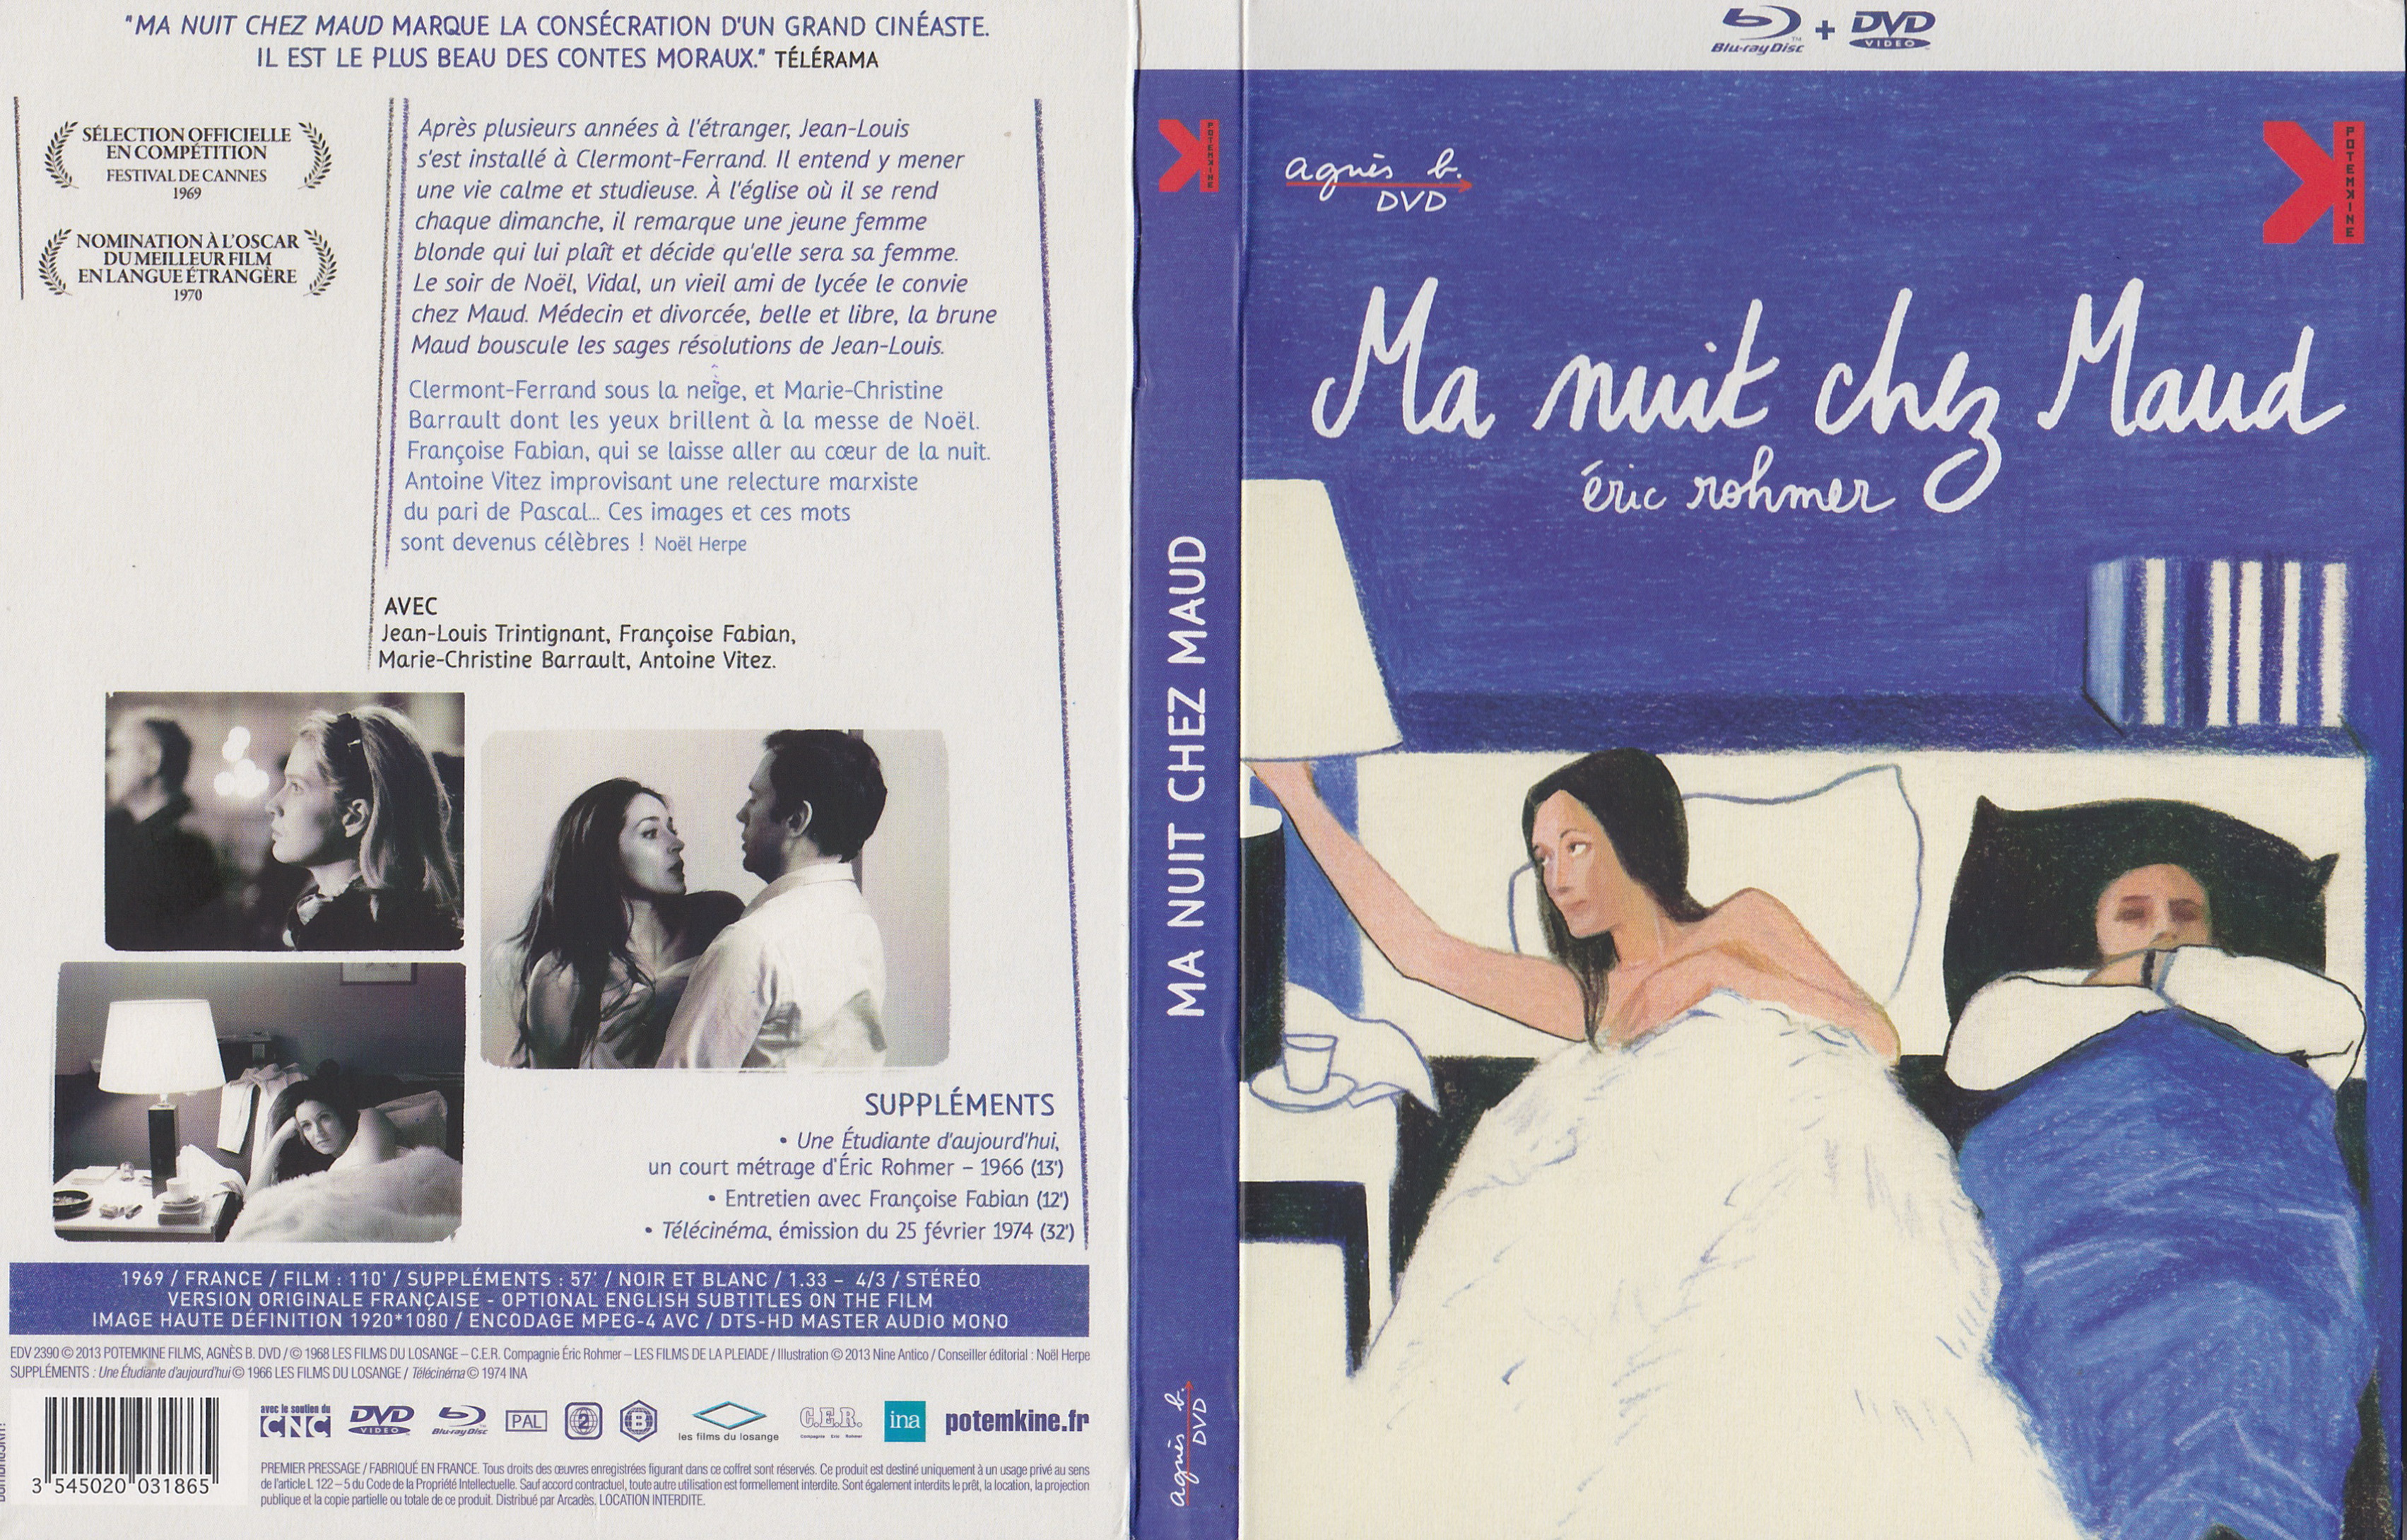 Jaquette DVD Ma nuit chez Maud (BLU-RAY)